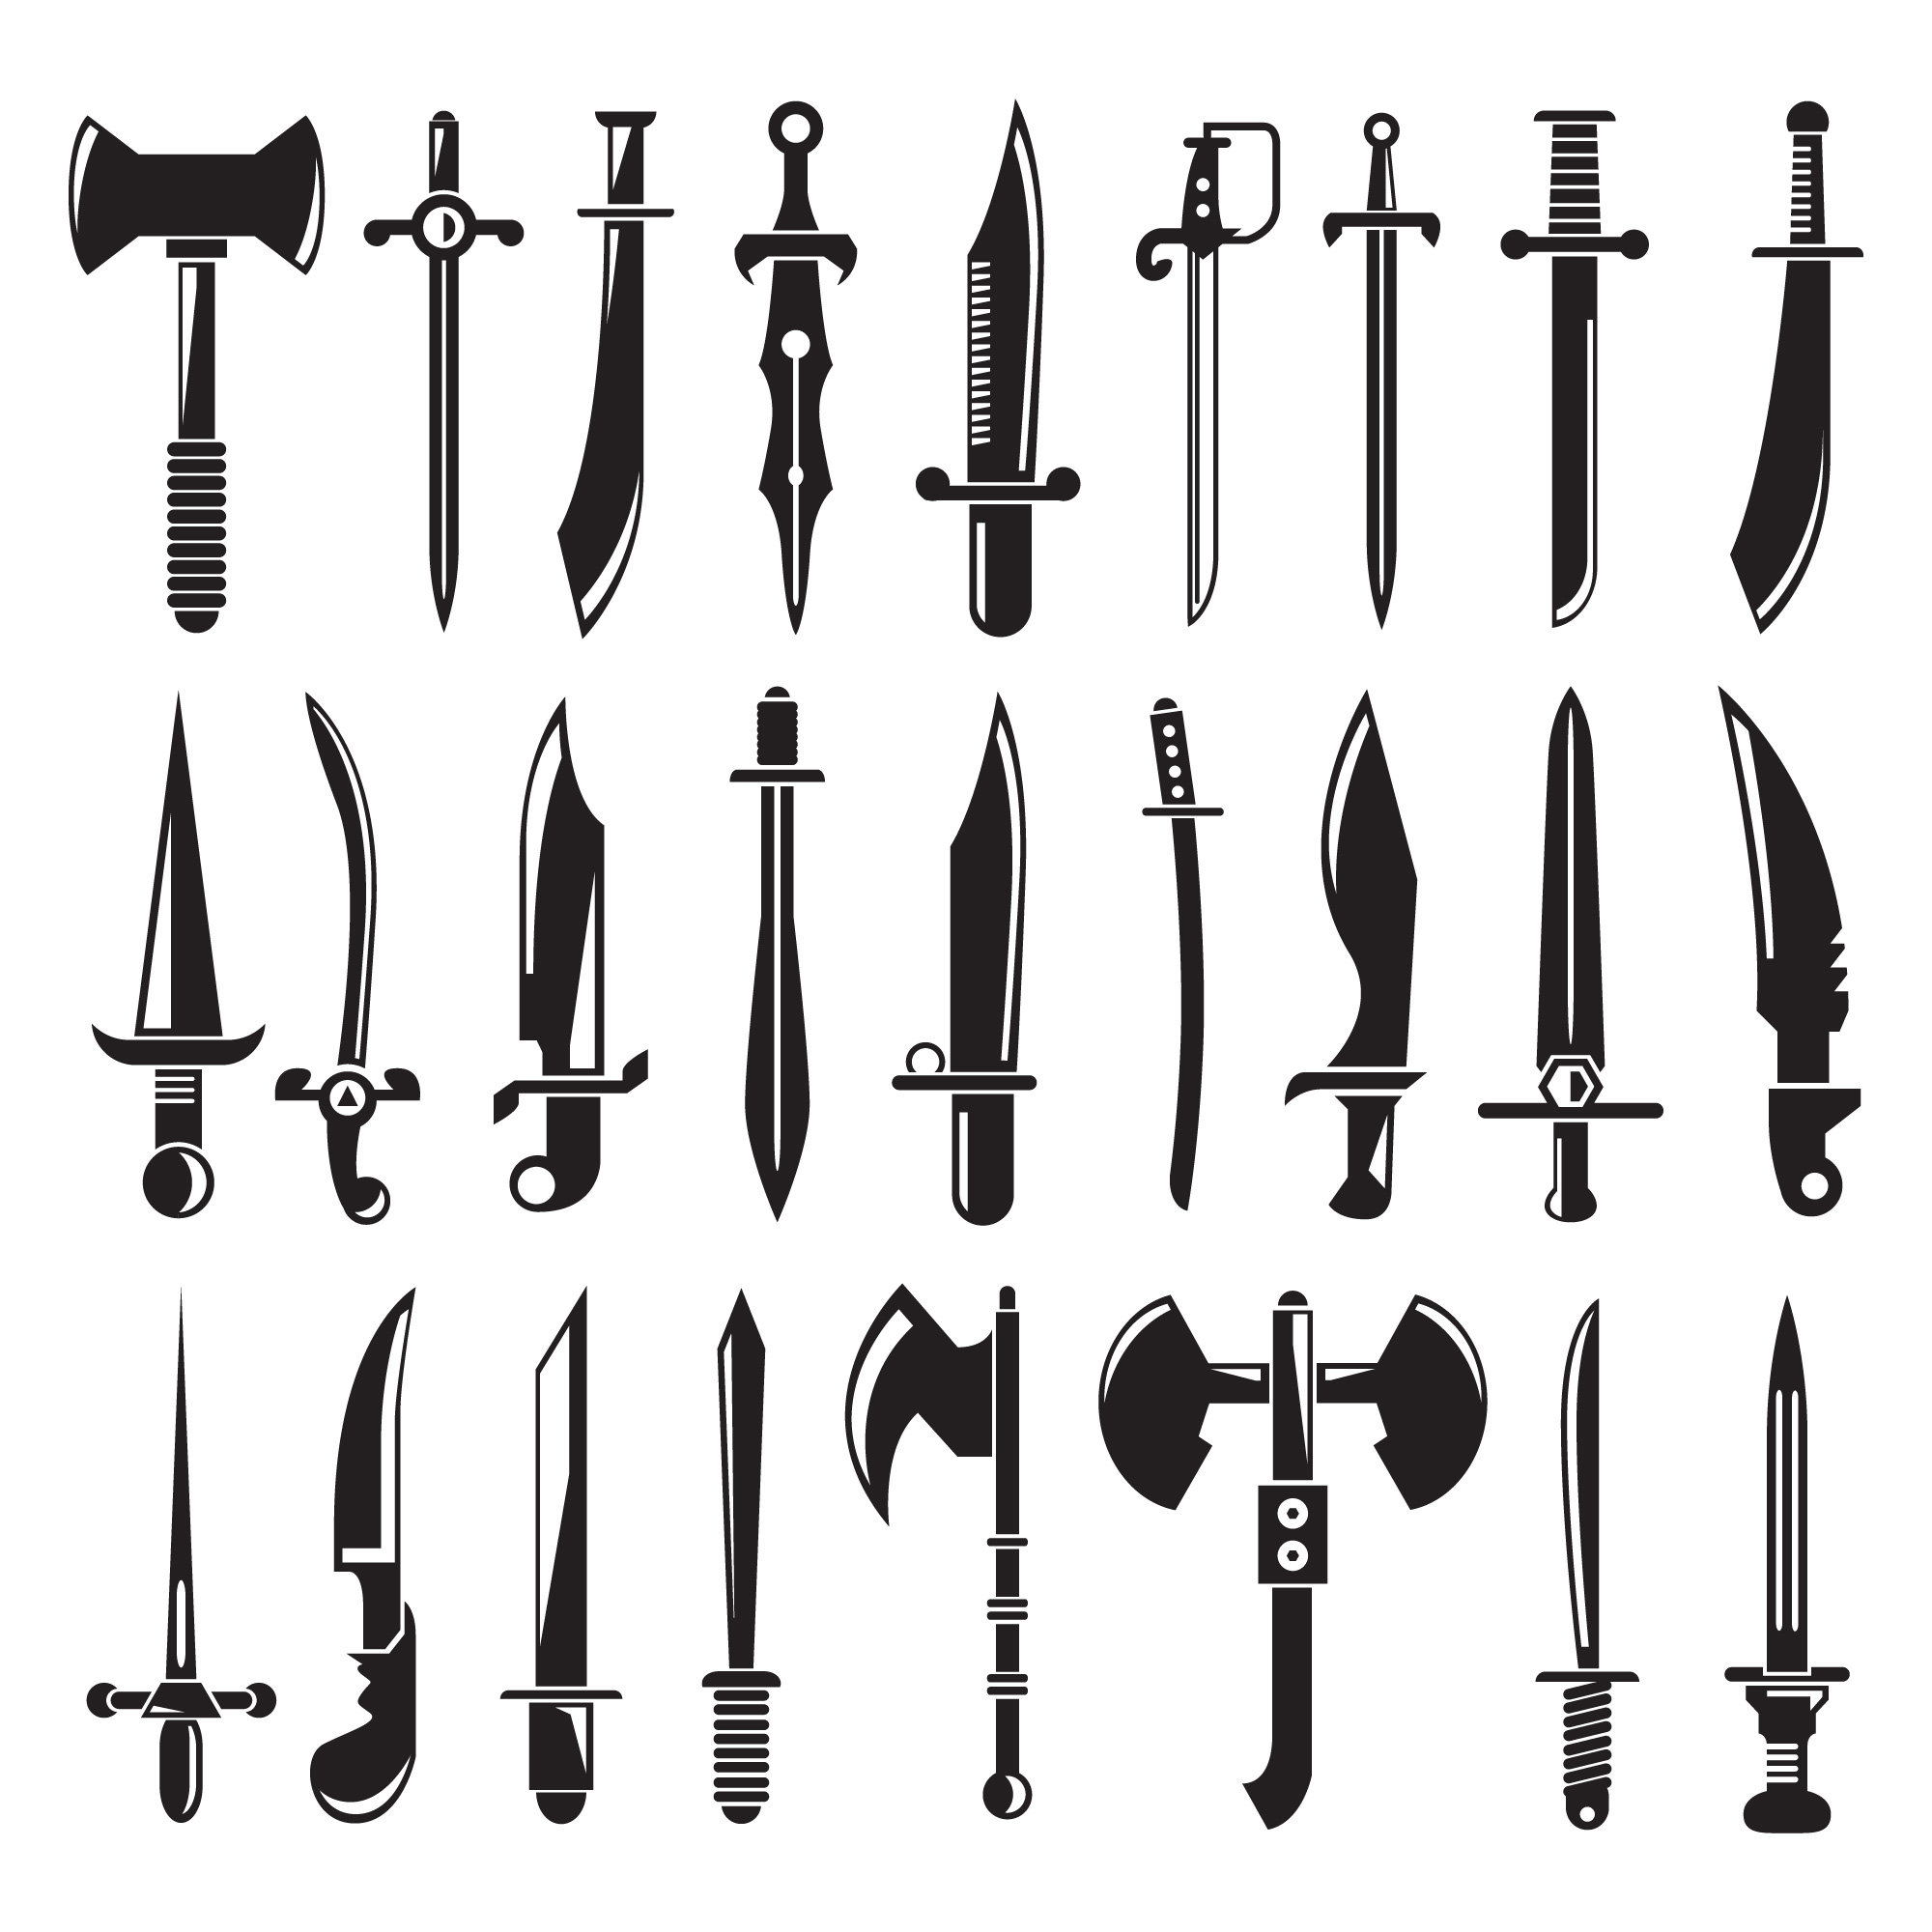 Sword Logo Secure Security Medieval Vector, Secure, Security, Medieval PNG  and Vector with Transparent Background for Free Download